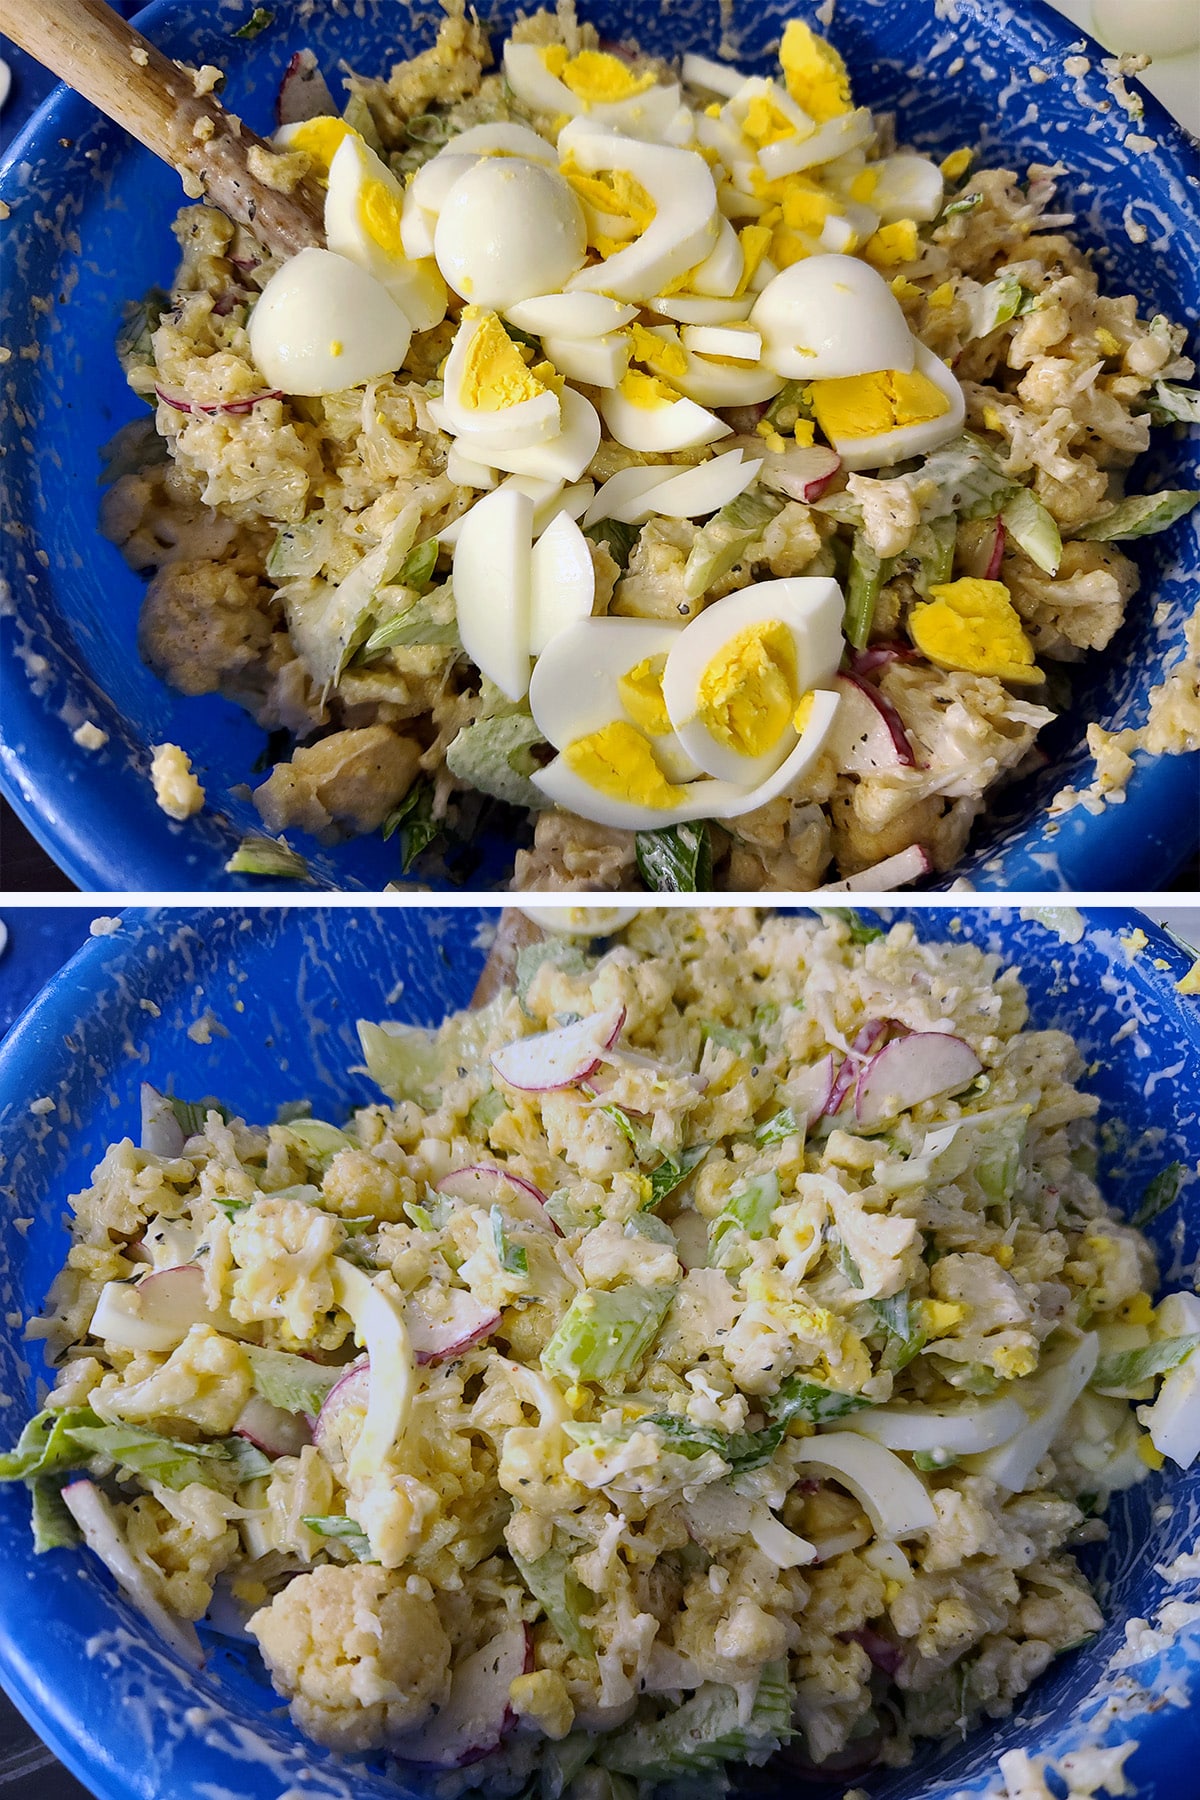 A 2 part image showing the hard boiled egg slices being added to the mock potato salad and folded in.